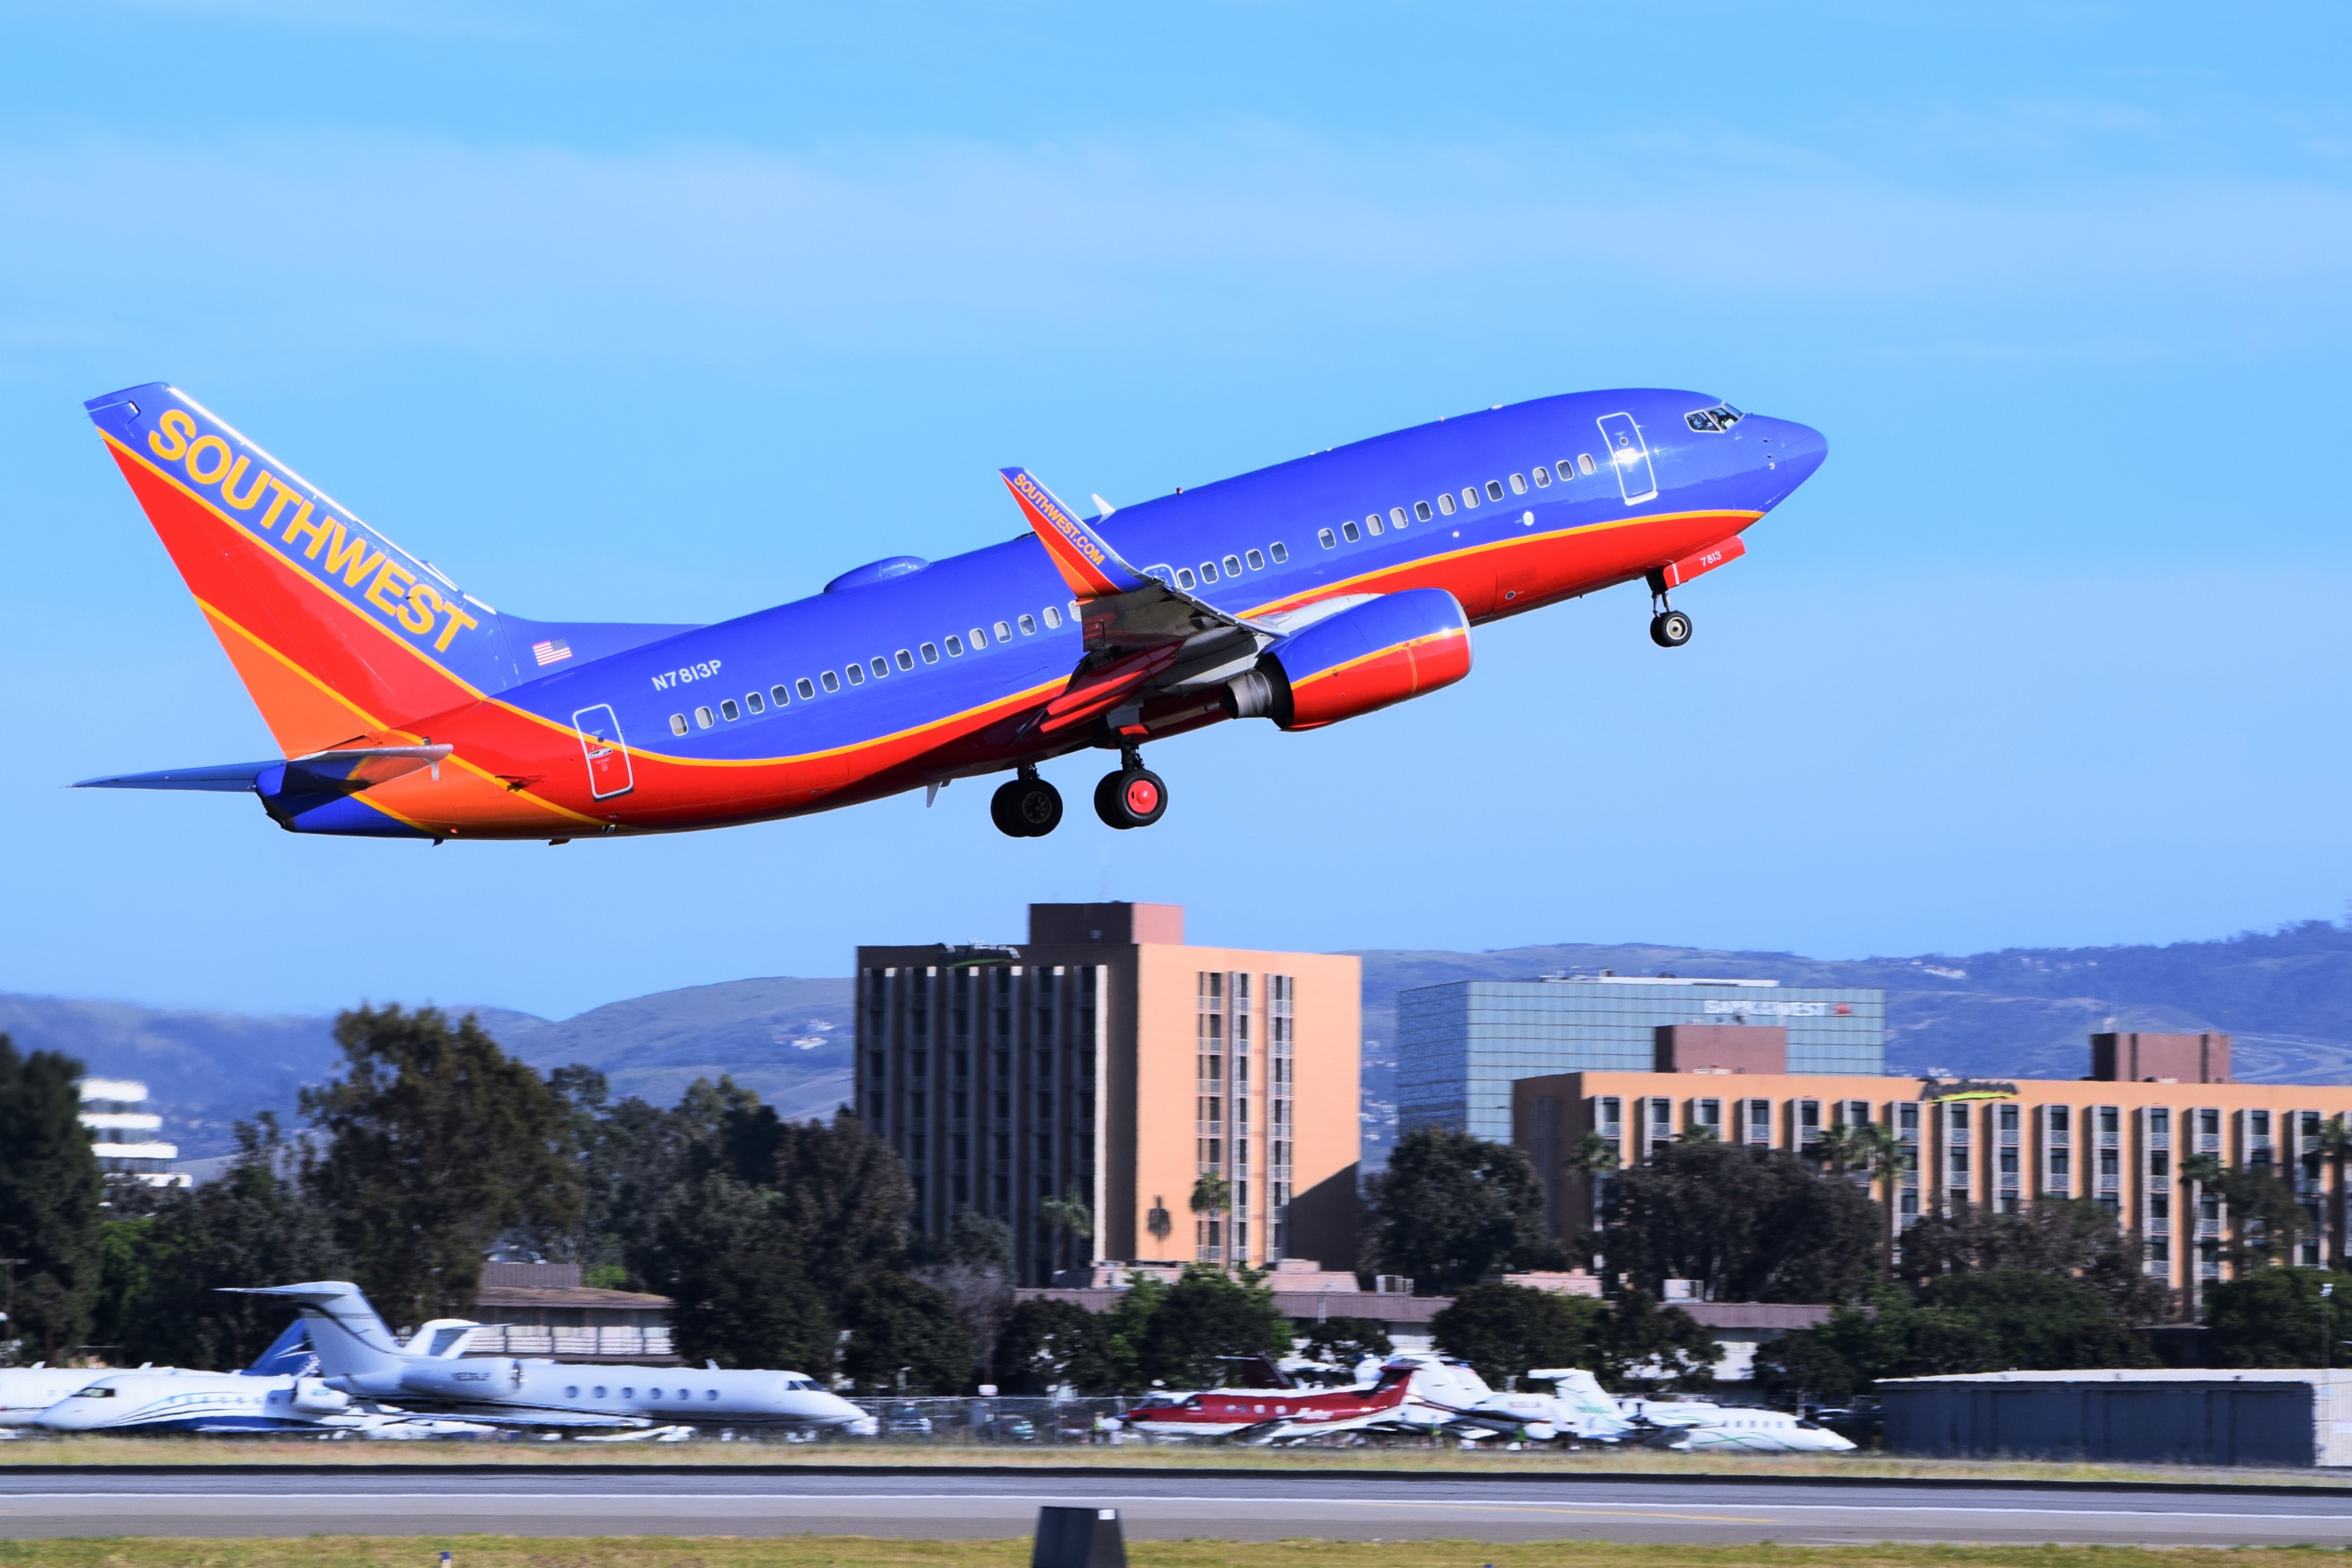 Where can you buy tickets for Southwest airlines?